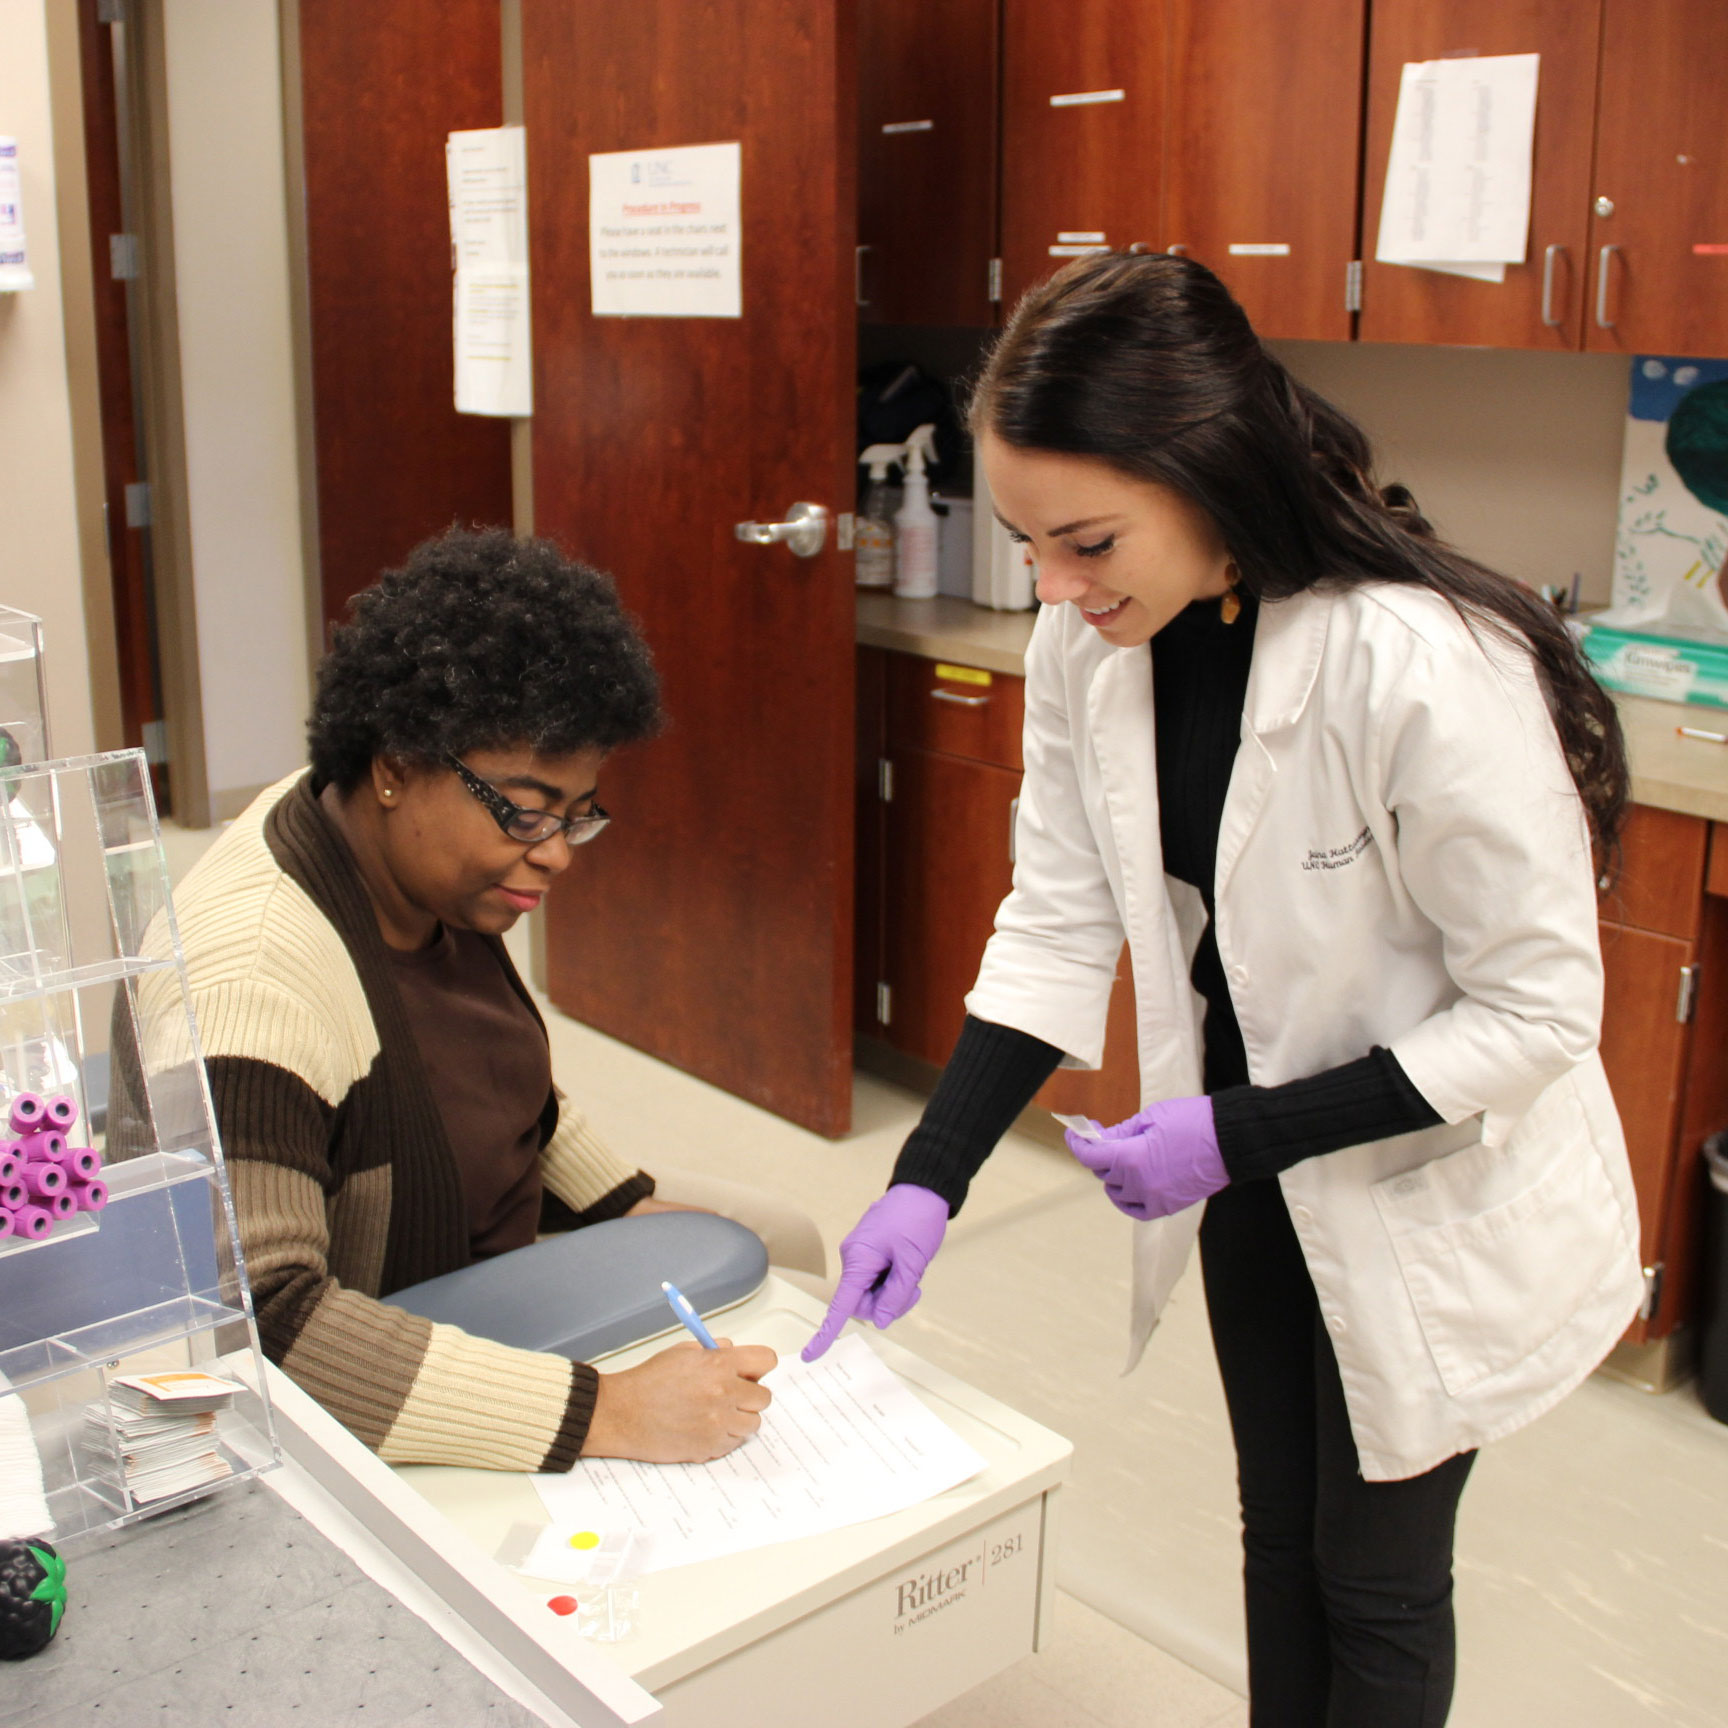 Clinical research programs aim to improve lives, recruit local participants at NCRC